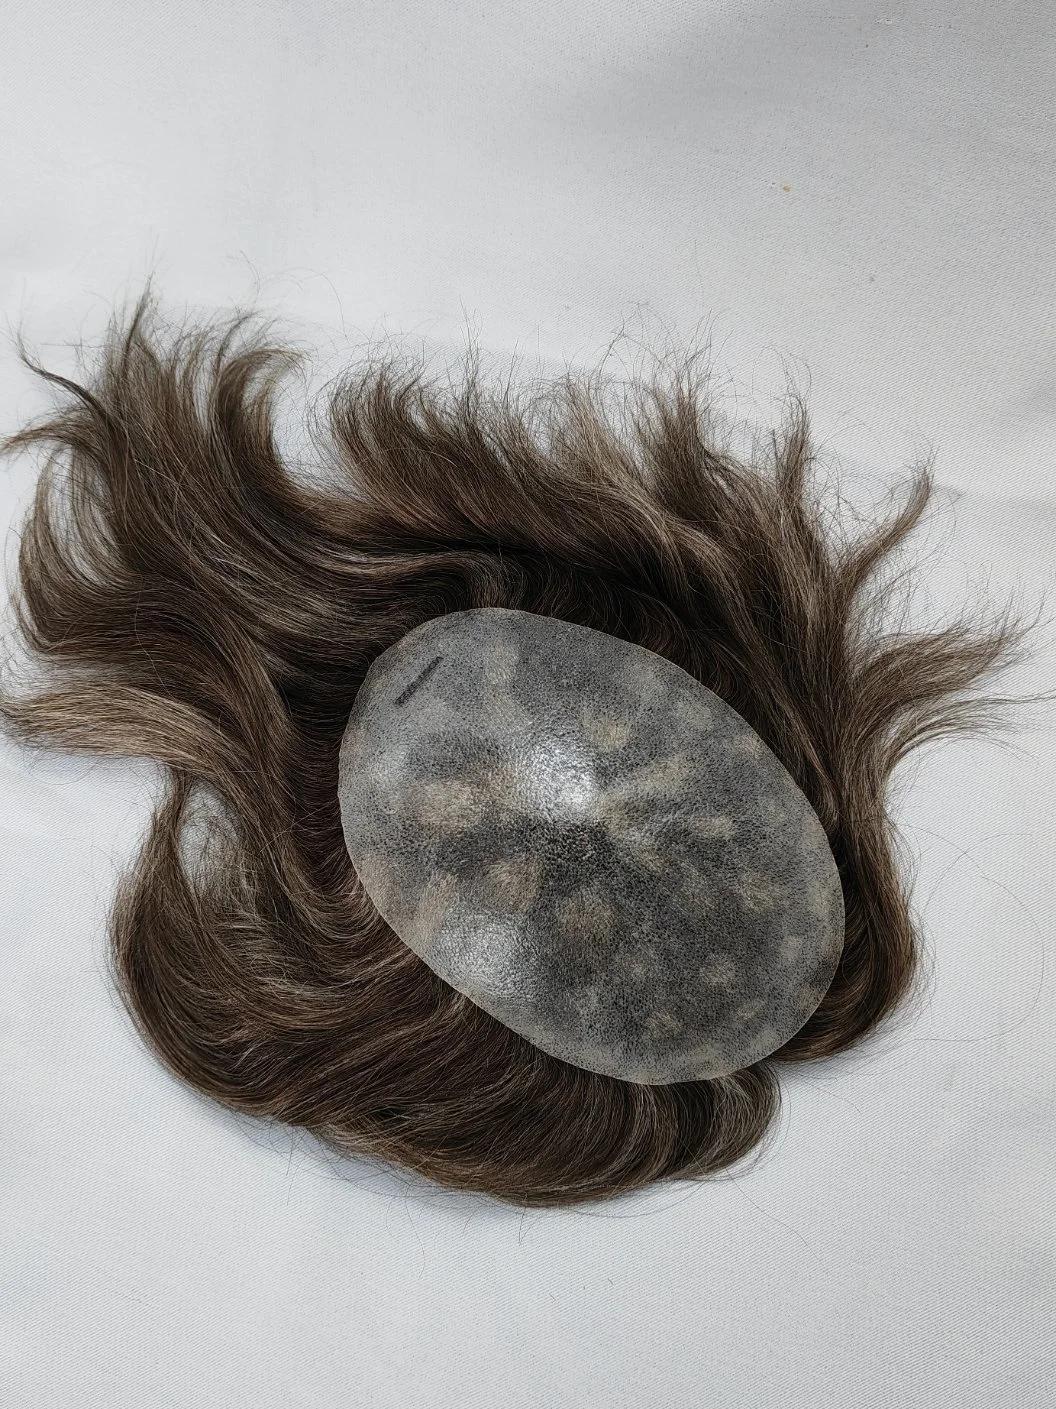 2022 Most Natural Custom Made Clear PU Base Injection Hairpiece Made of Remy Human Hair